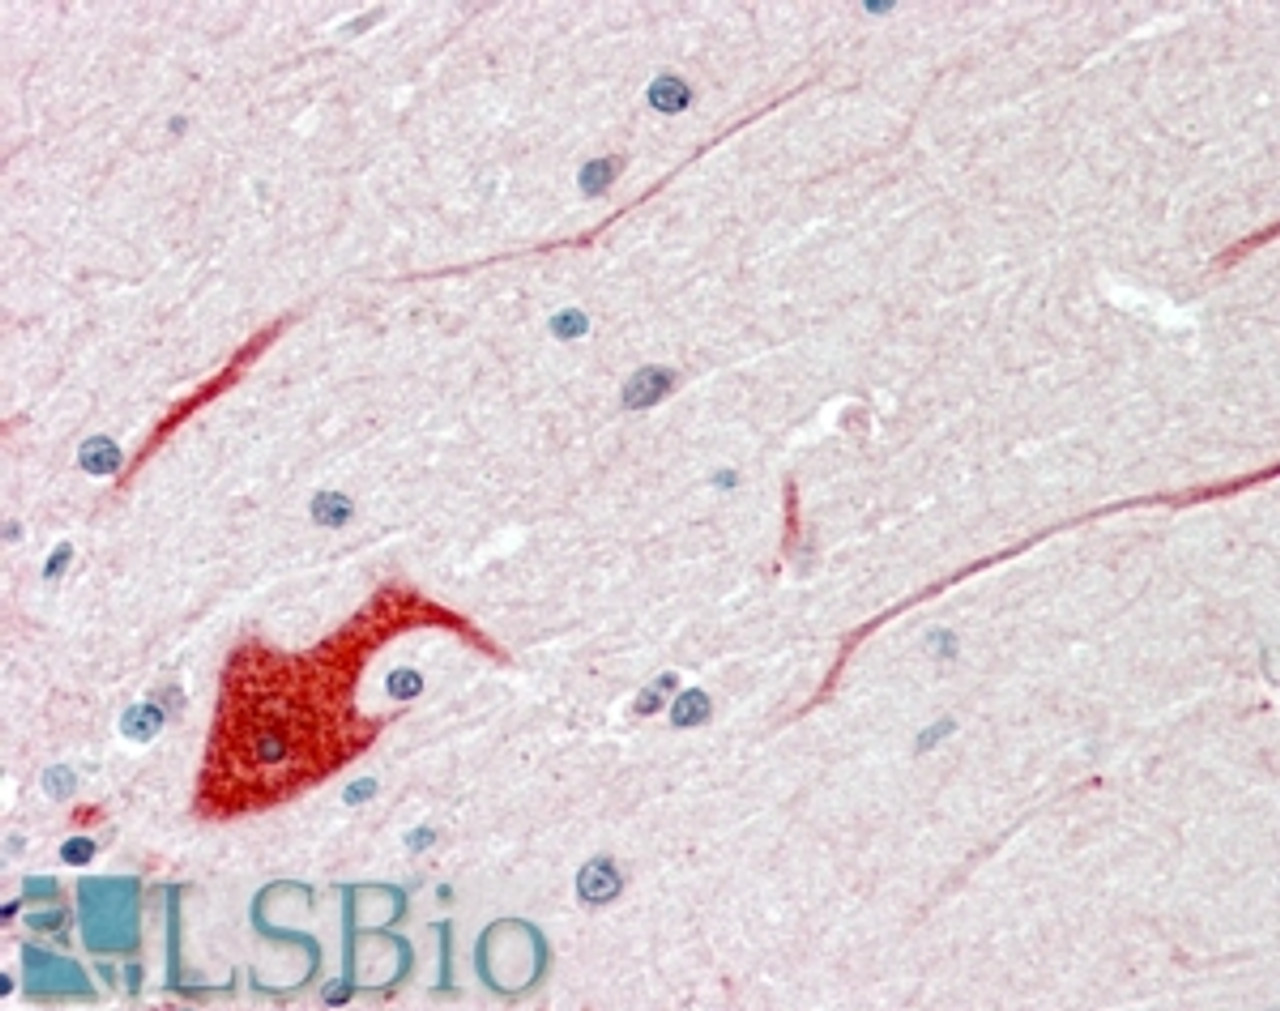 46-250 (3.75ug/ml) staining of paraffin embedded Human Cerebellum. Steamed antigen retrieval with citrate buffer pH 6, AP-staining. <strong>This data is from a previous batch, not on sale.</strong>